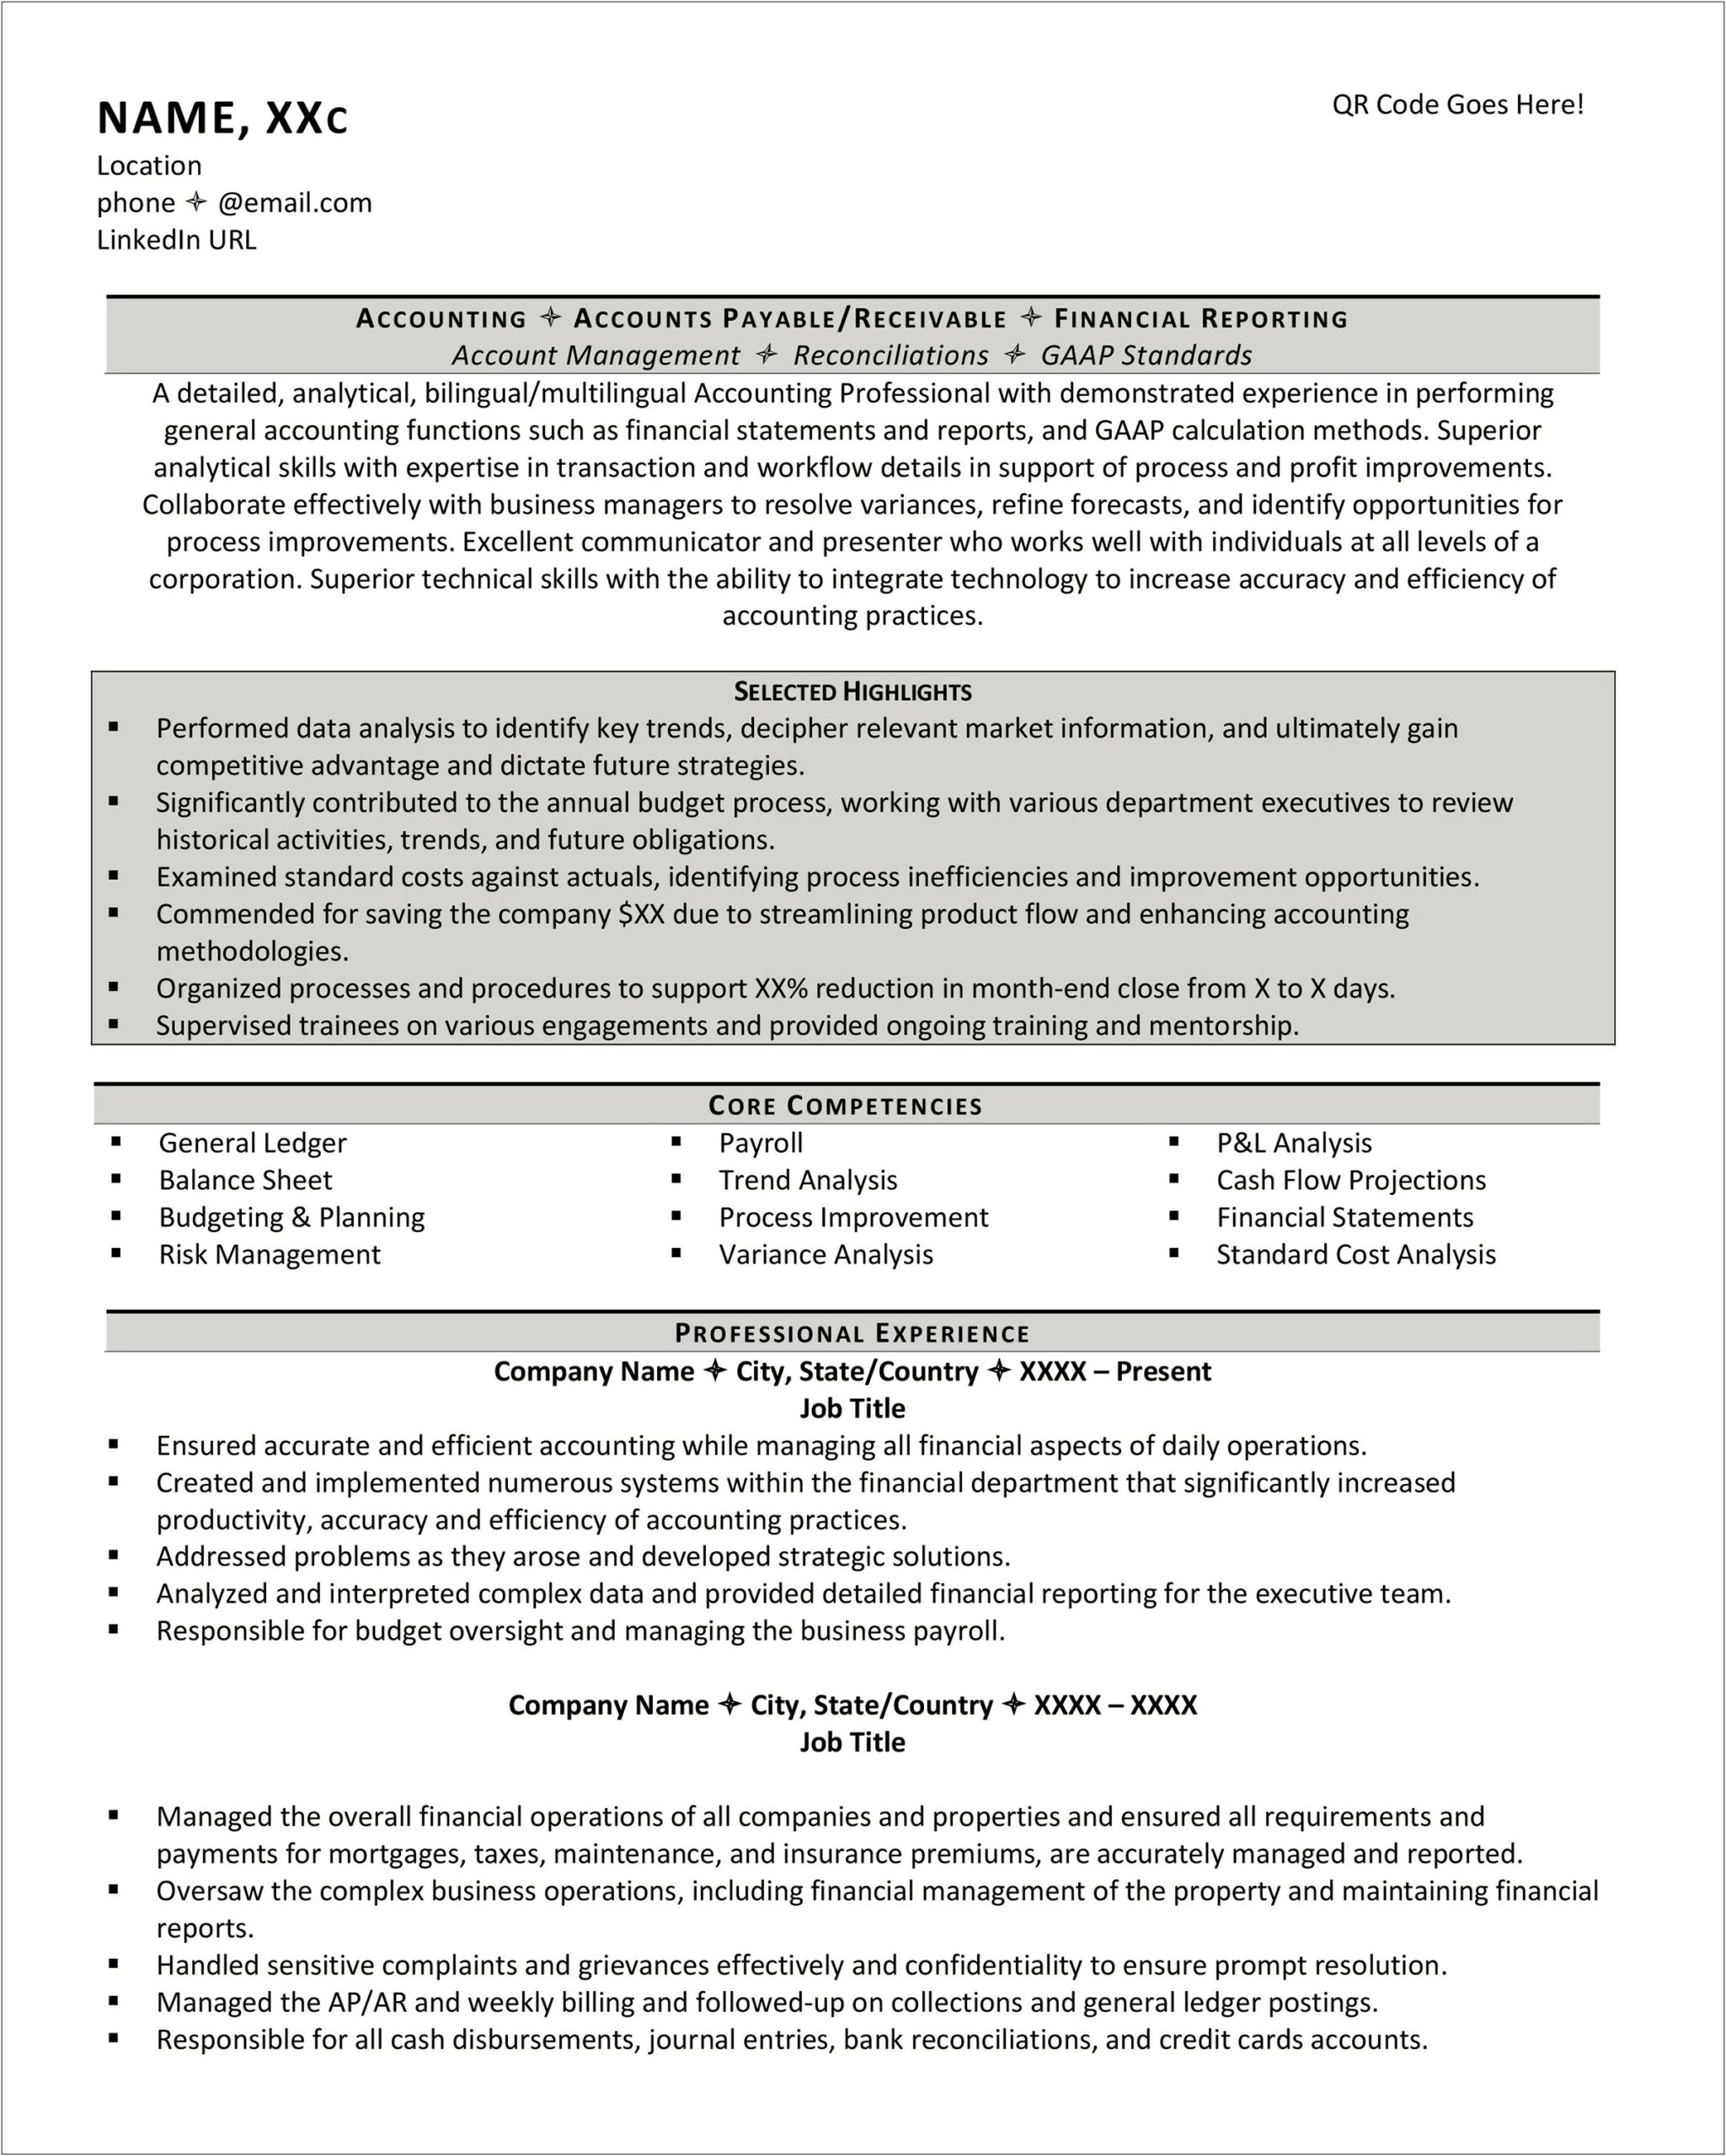 Other Words For Responsible In A Resume